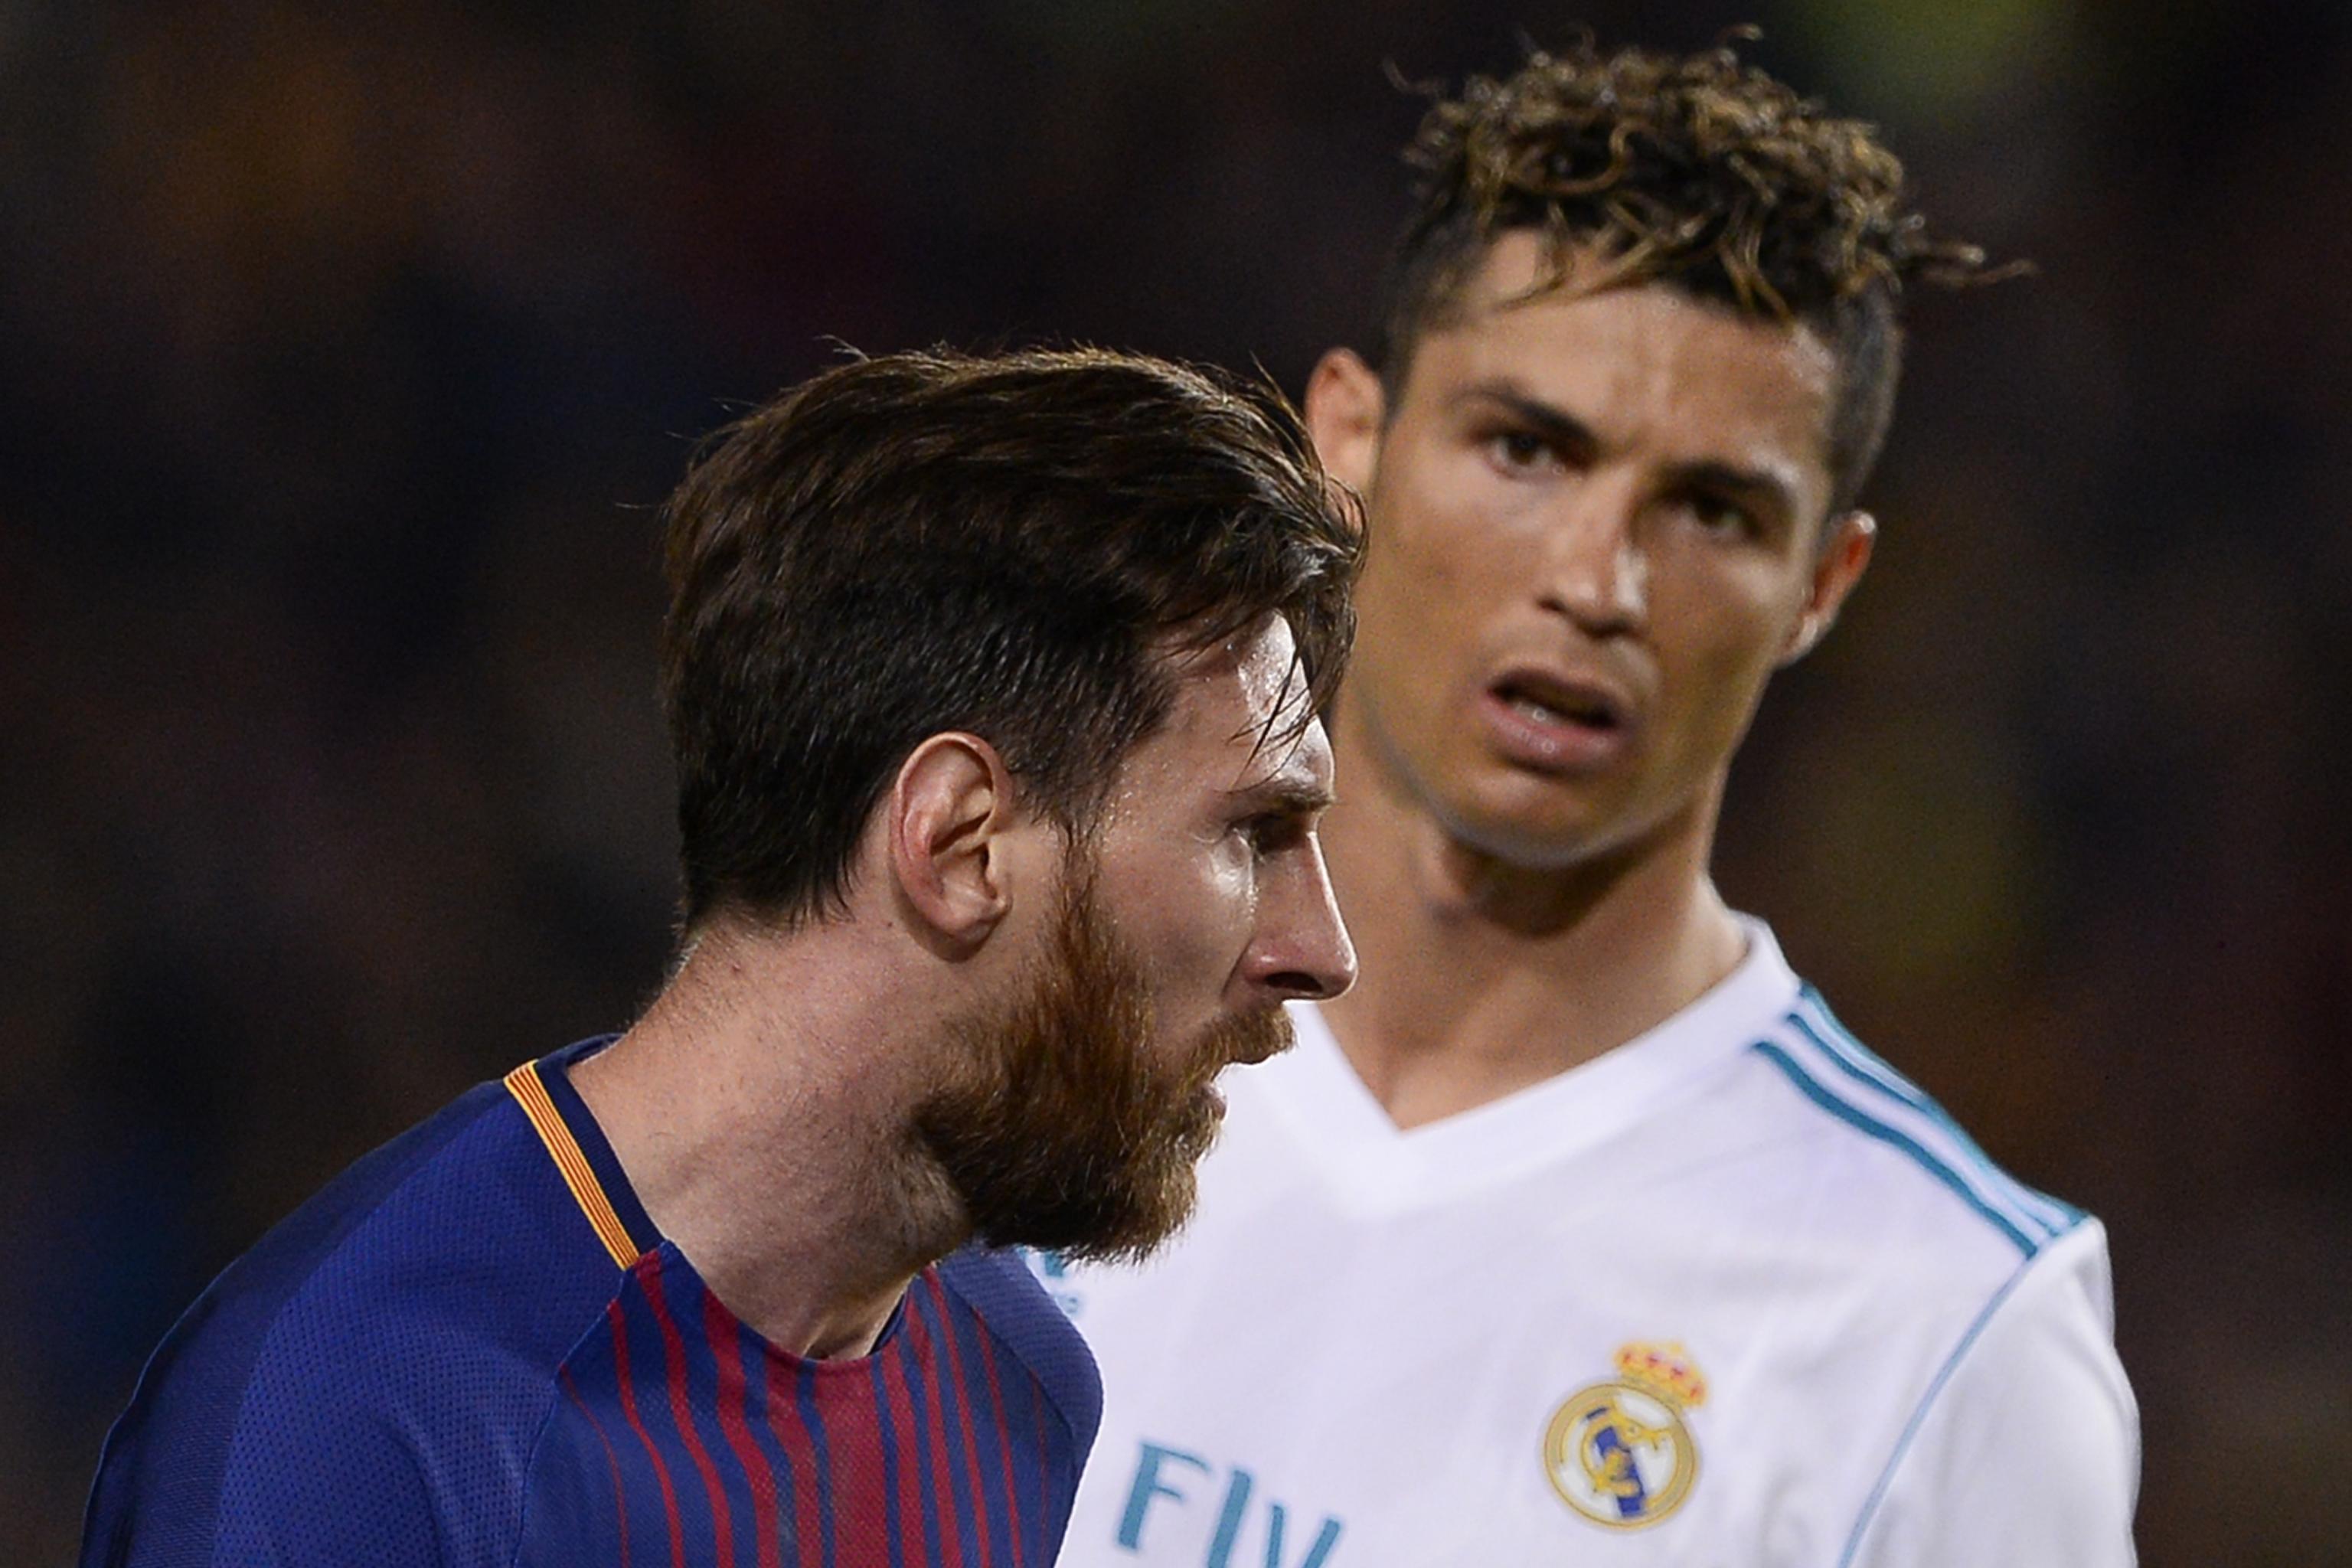 Competing with Messi made both of us better, admits Cristiano Ronaldo